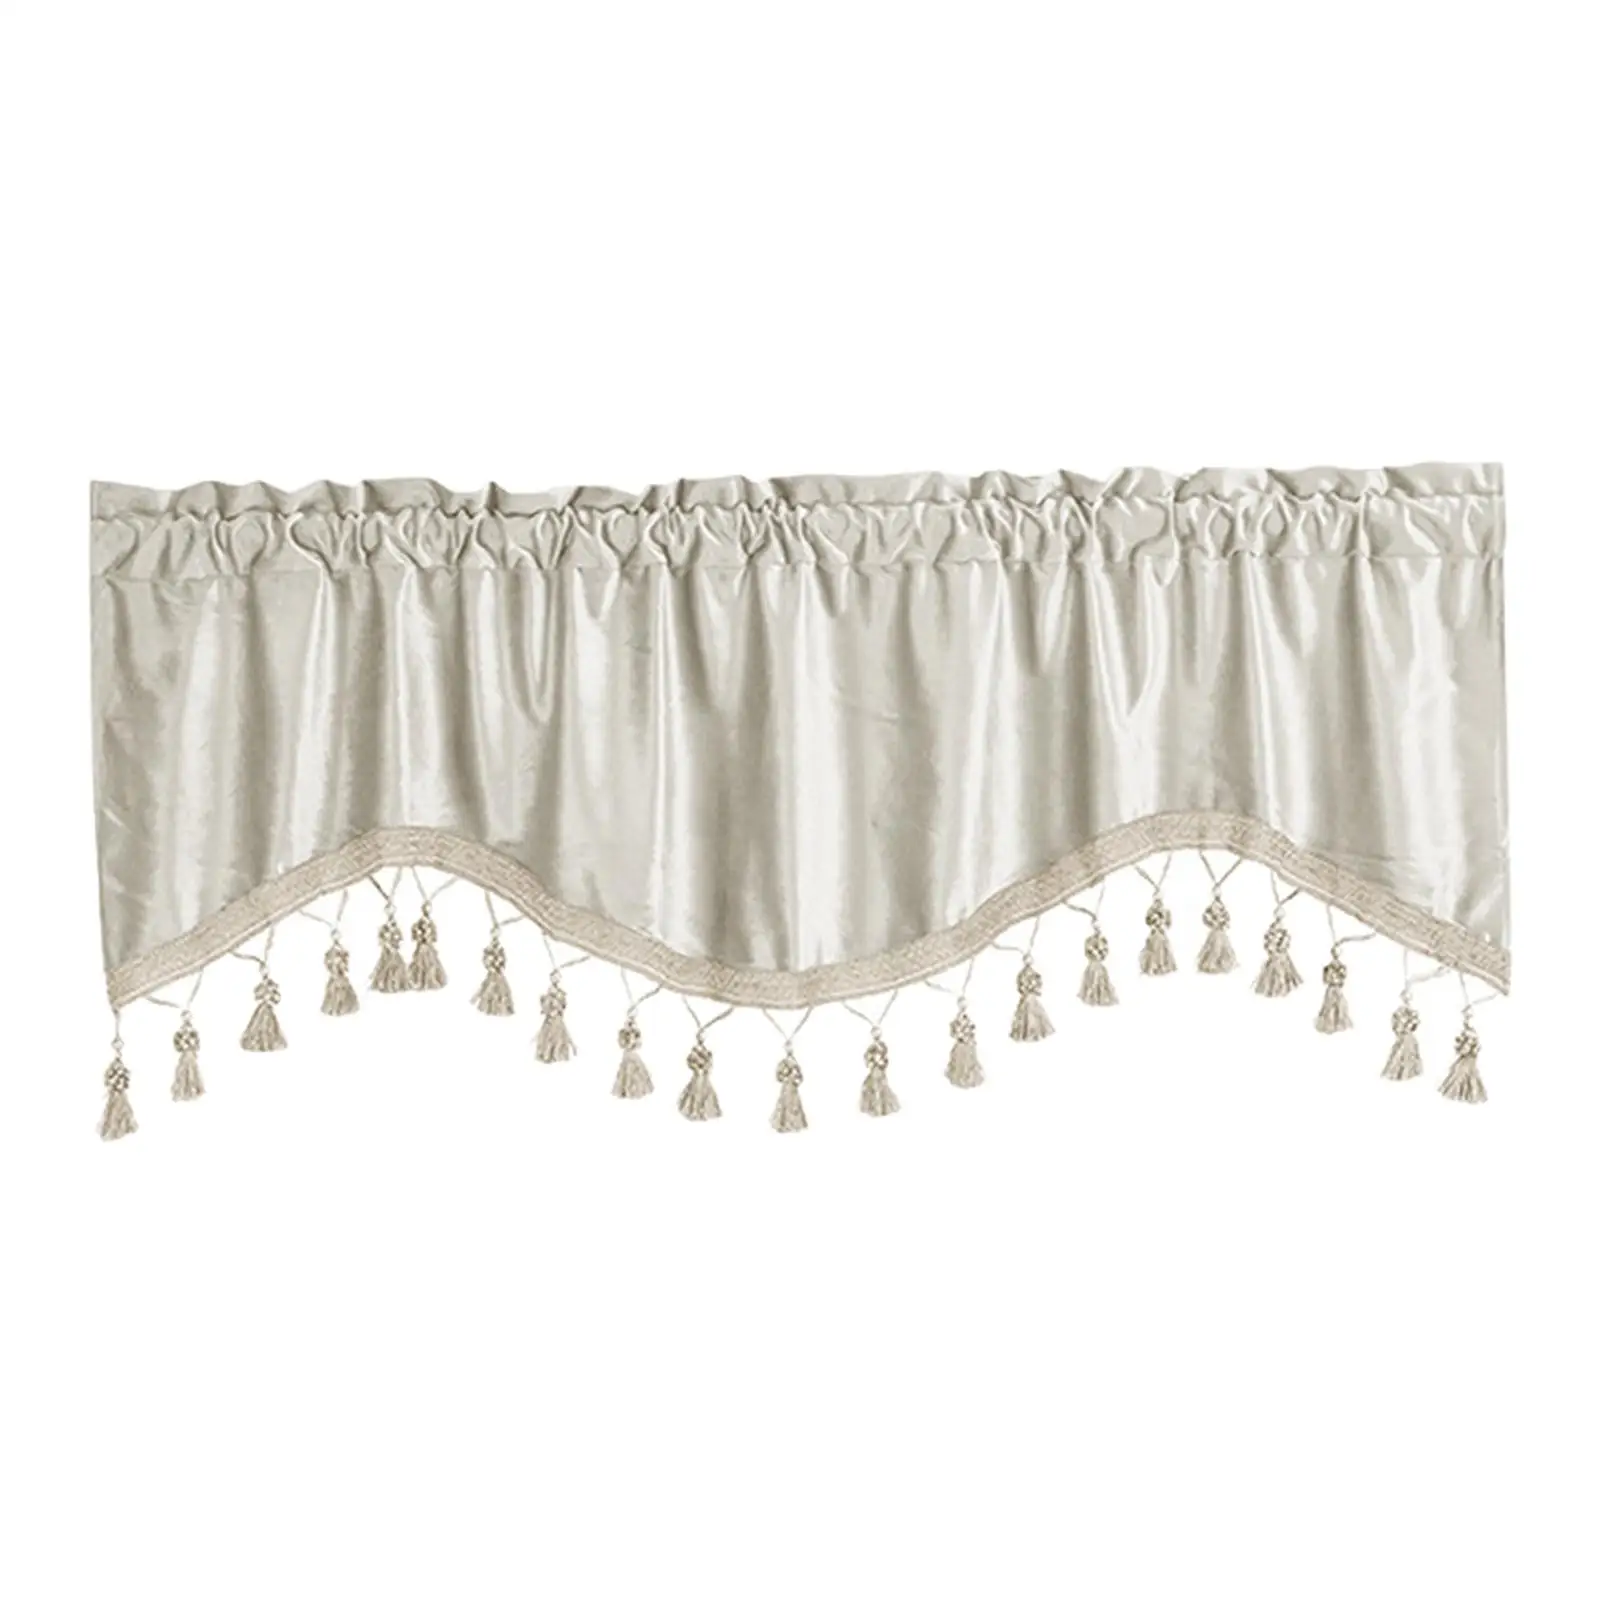 Rod Pocket Curtain Valance Window Tiers Small Window Curtains Short Curtain for Bathroom Home Windows Bedroom Kitchen